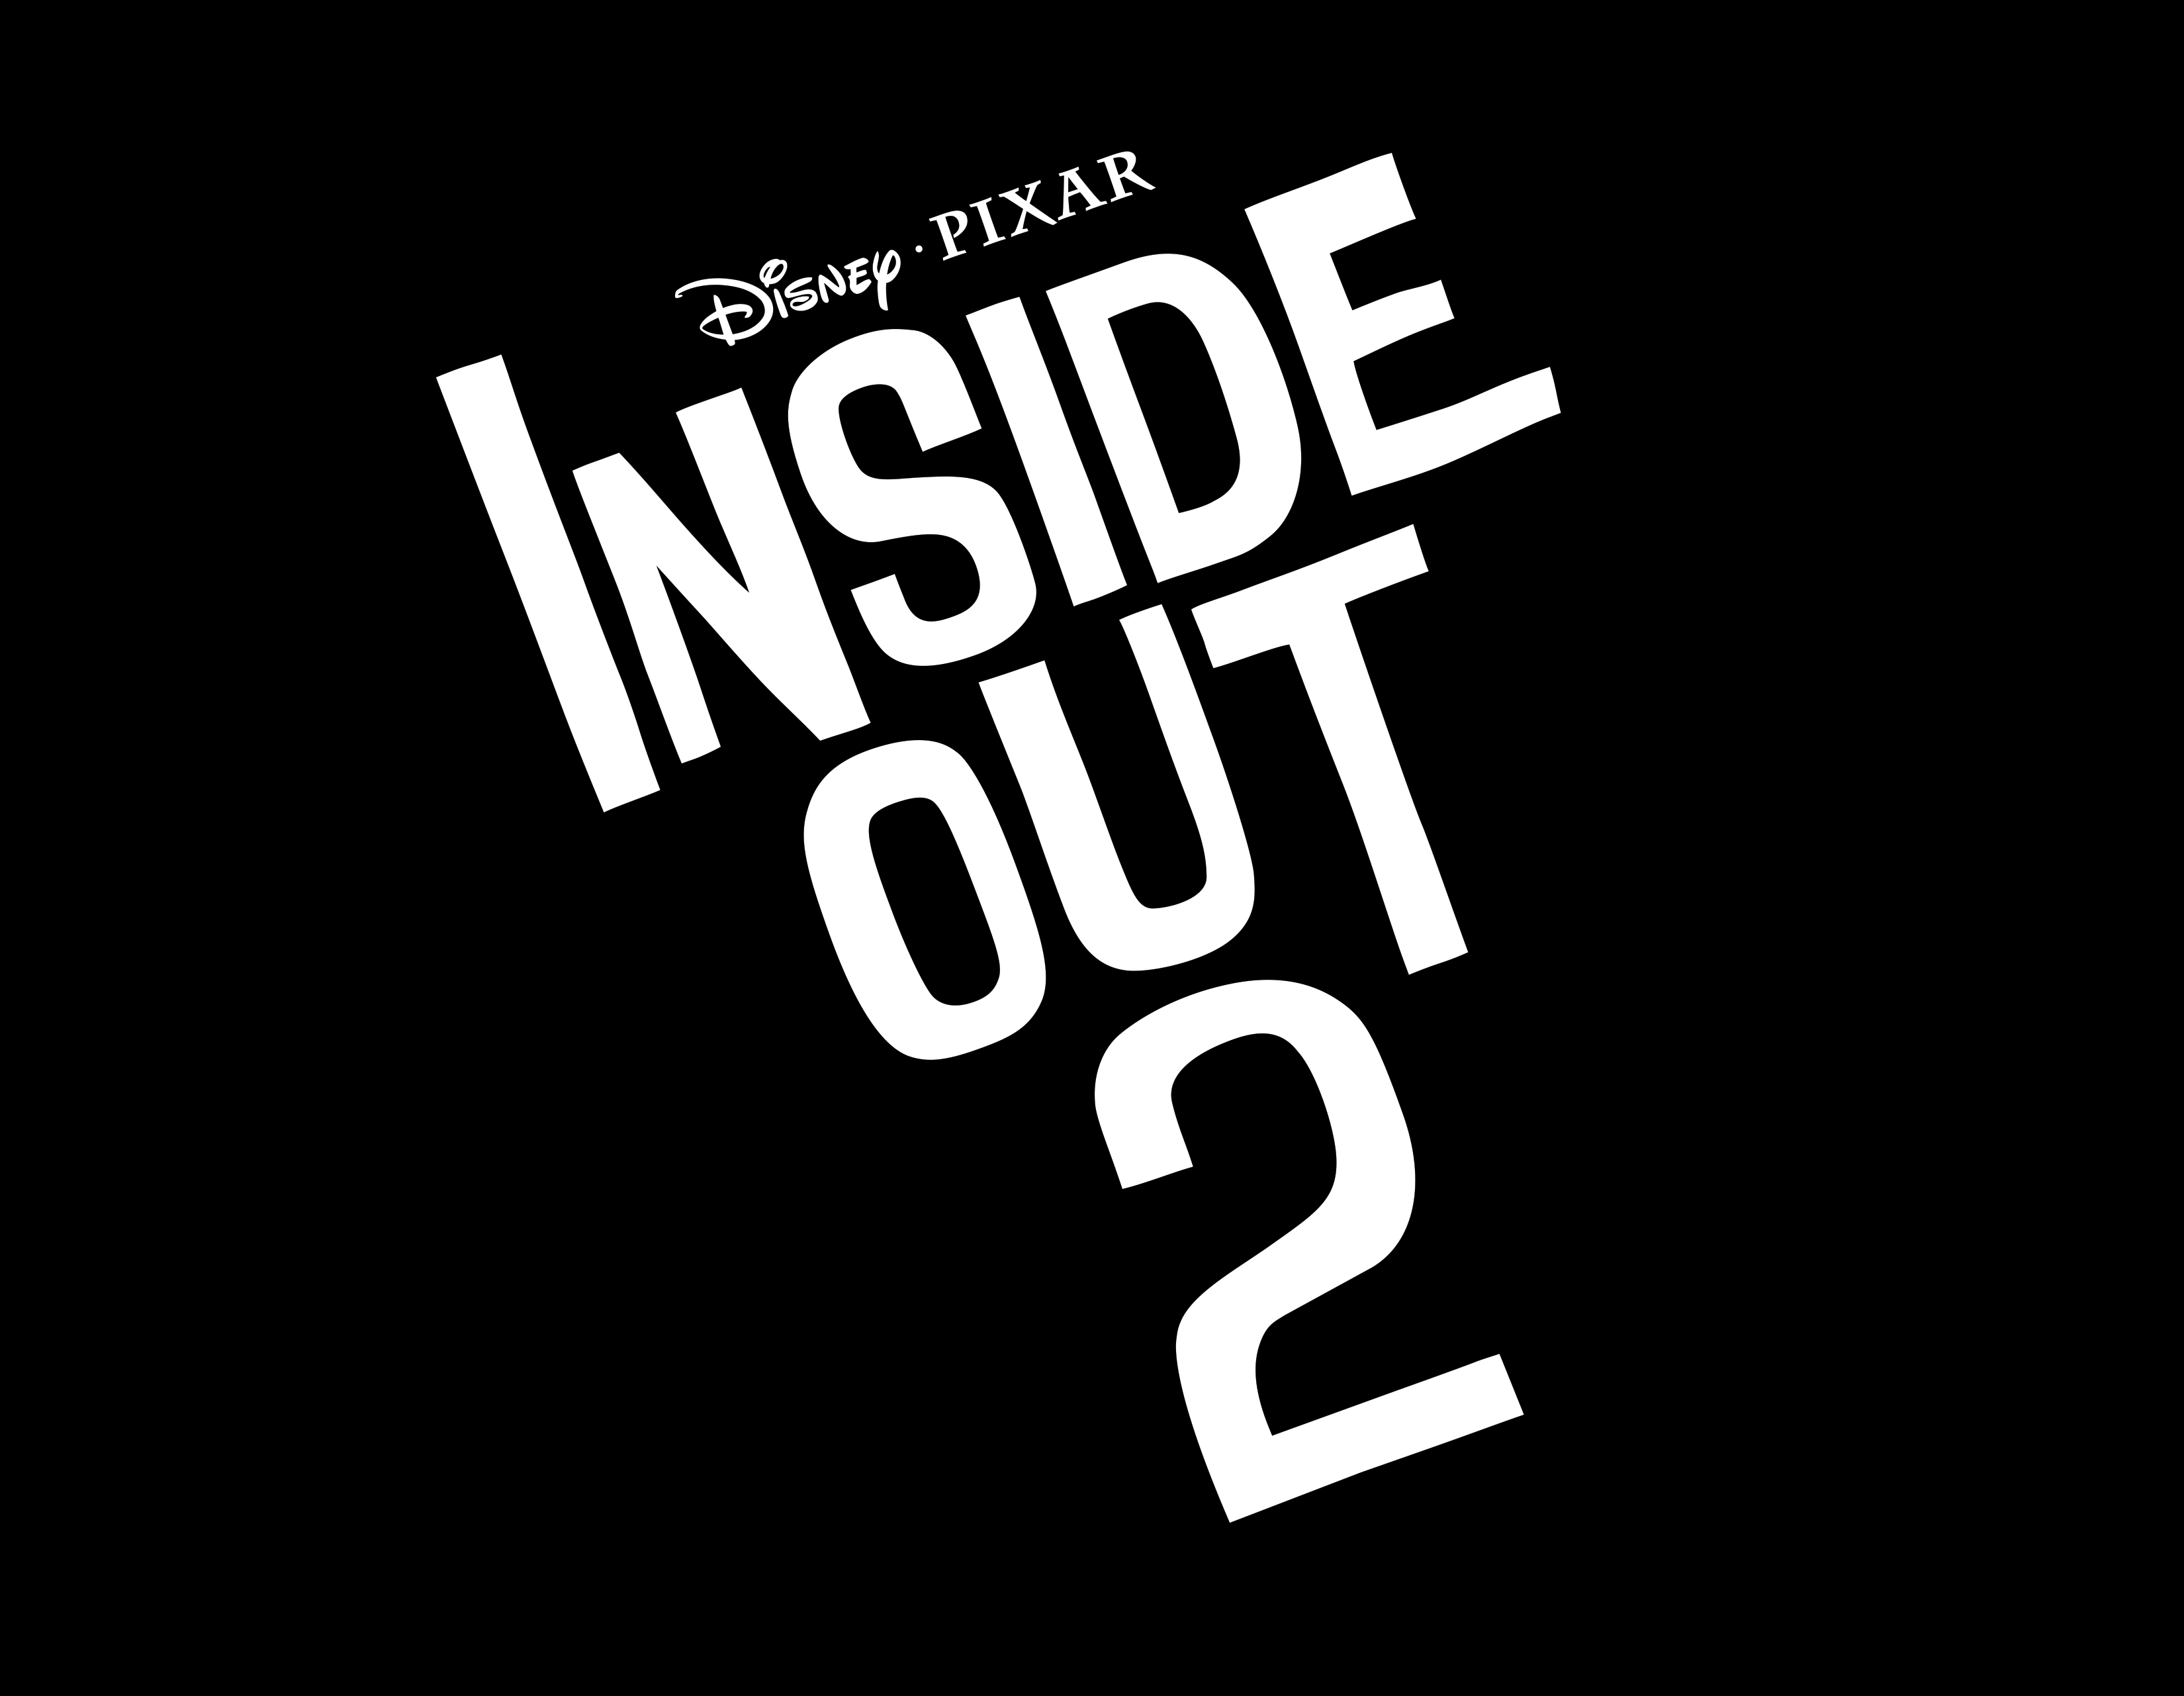 The Inside Out 2 logo is slanted to the left, white text on a black background